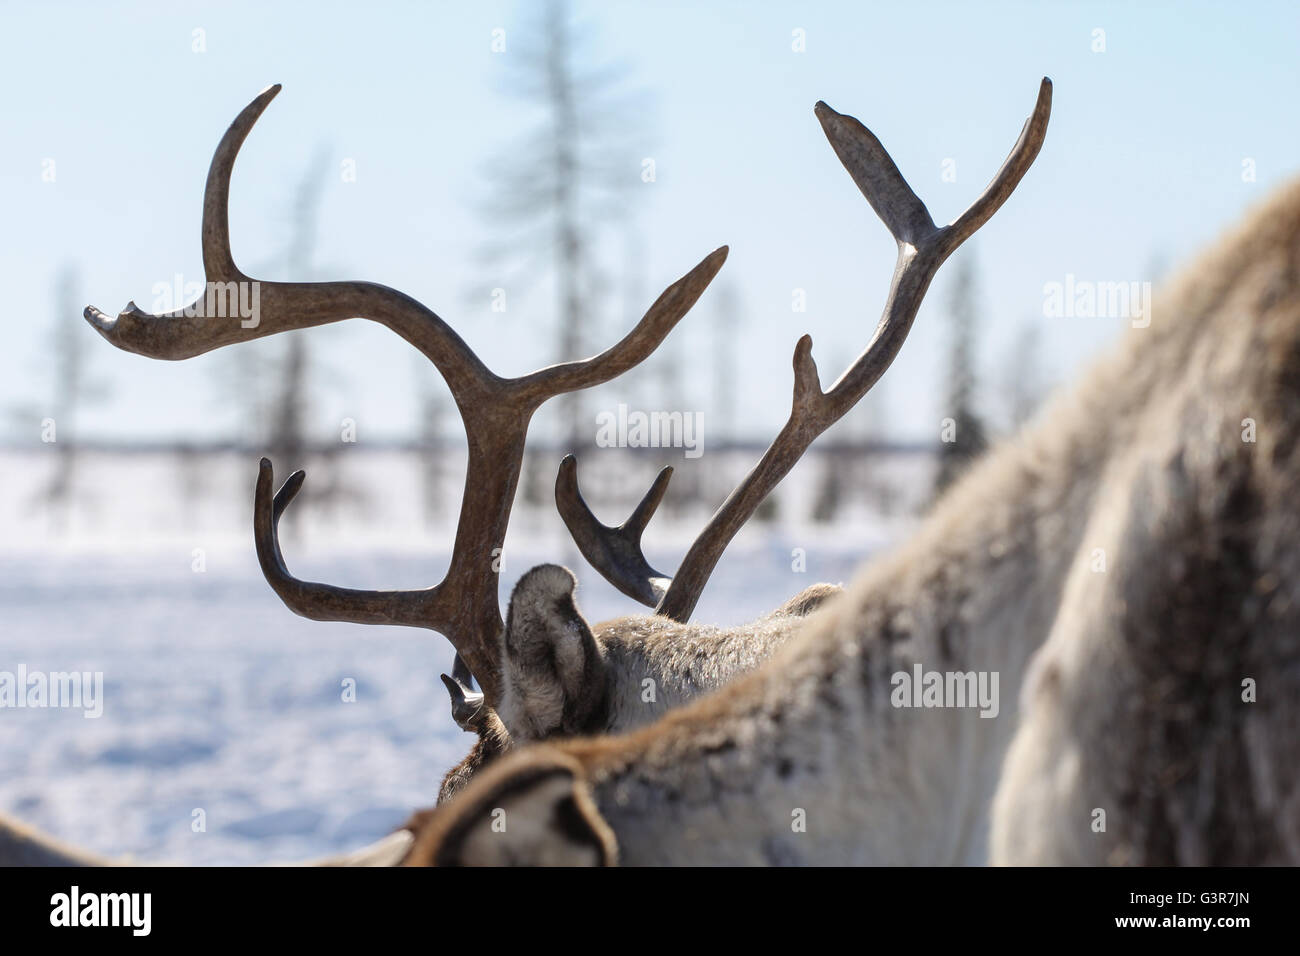 Reindeer in Yamal tundra. Horn, close-up. Stock Photo